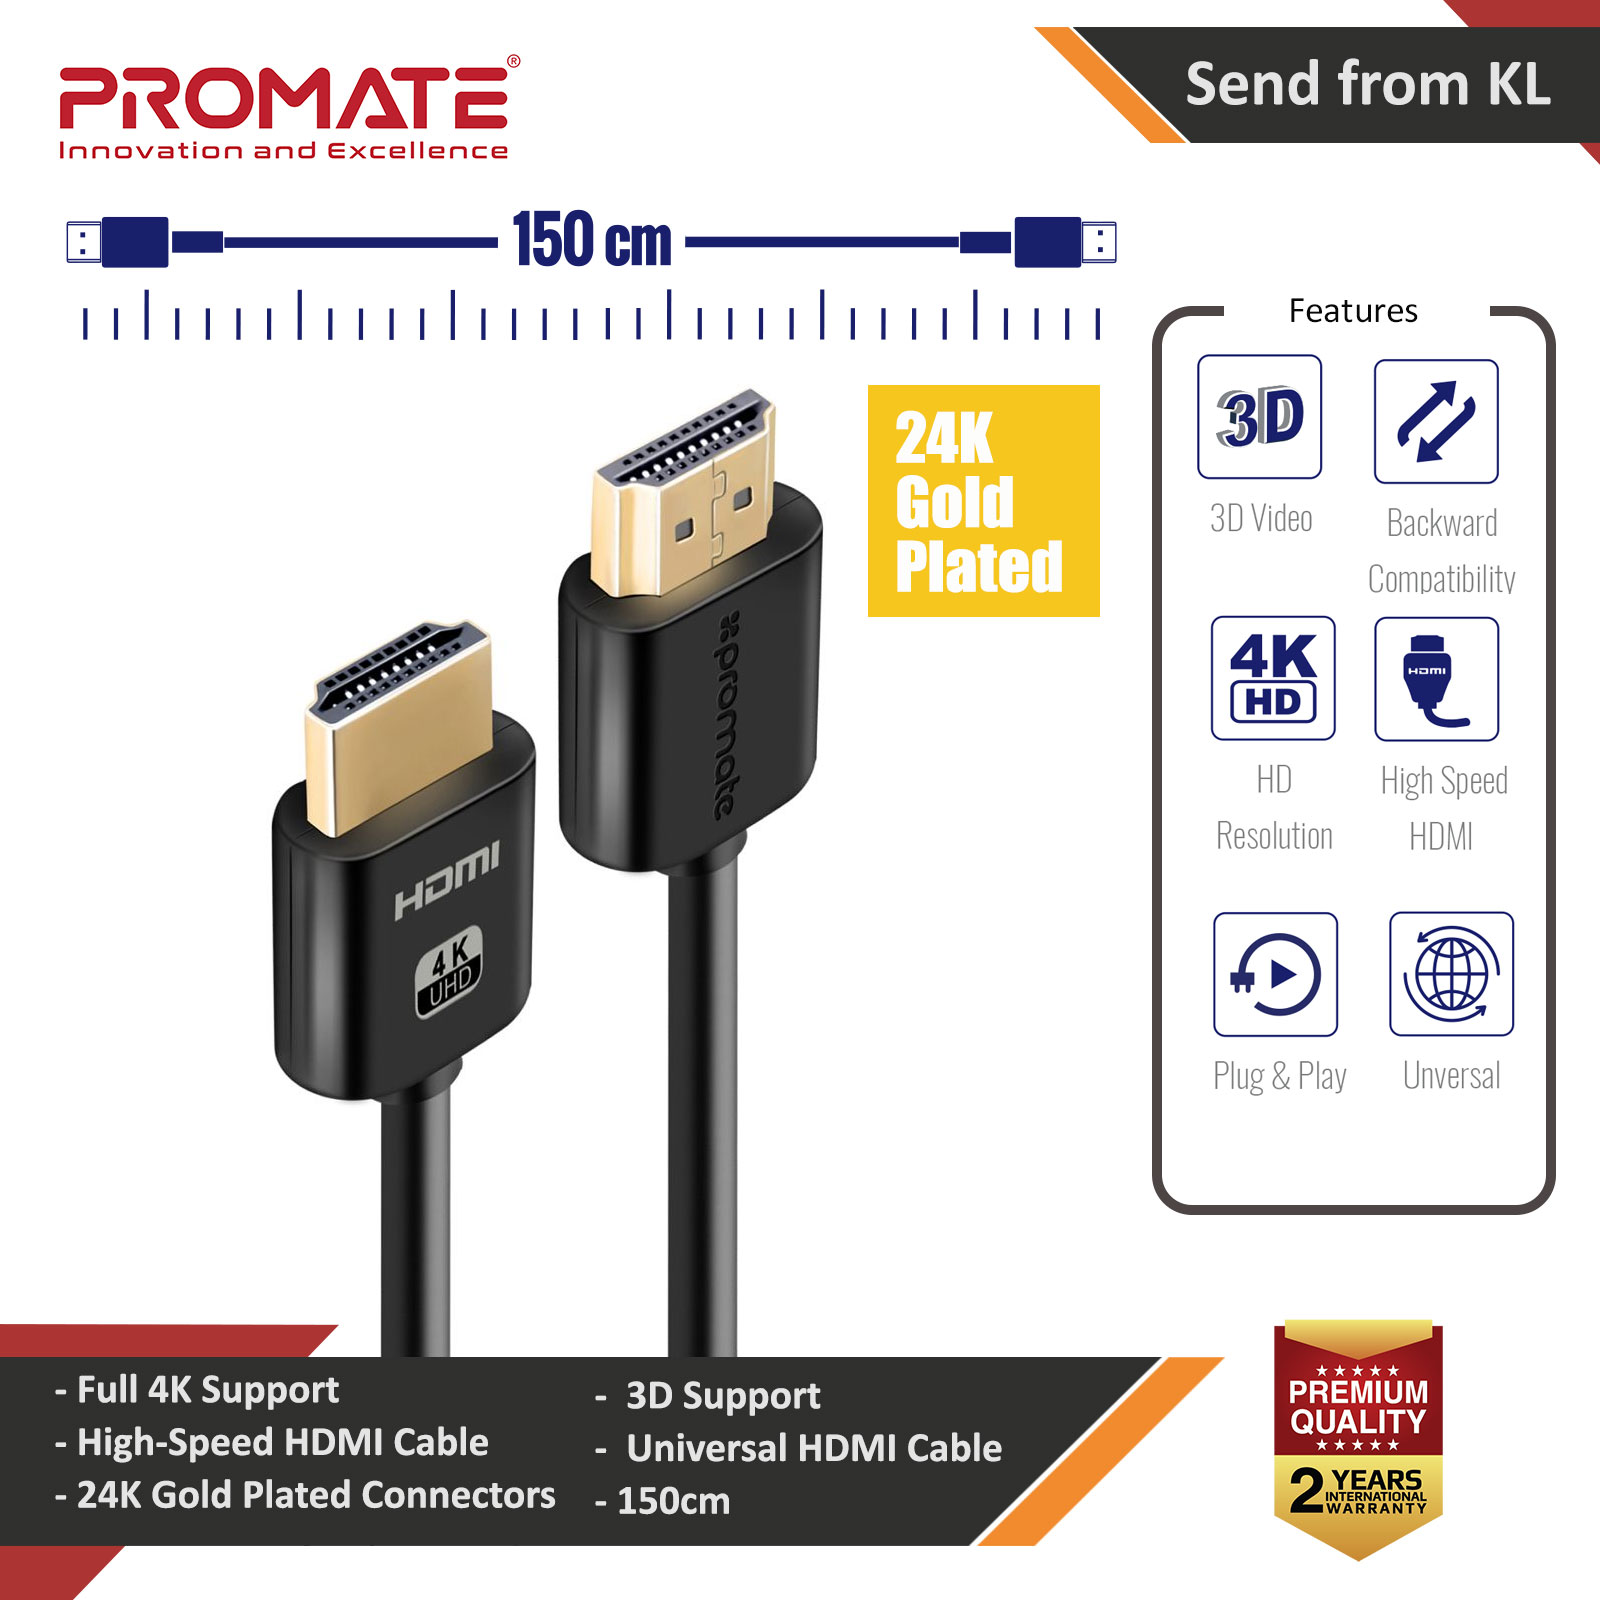 Picture of Promate 4K HDMI Cable High-Speed 1.5 Meter HDMI Cable with 24K Gold Plated Connector and Ethernet 3D Video Support for HDTV Projectors Computers LED TV and Game consoles 150cm ProLink4K2-150 Red Design- Red Design Cases, Red Design Covers, iPad Cases and a wide selection of Red Design Accessories in Malaysia, Sabah, Sarawak and Singapore 